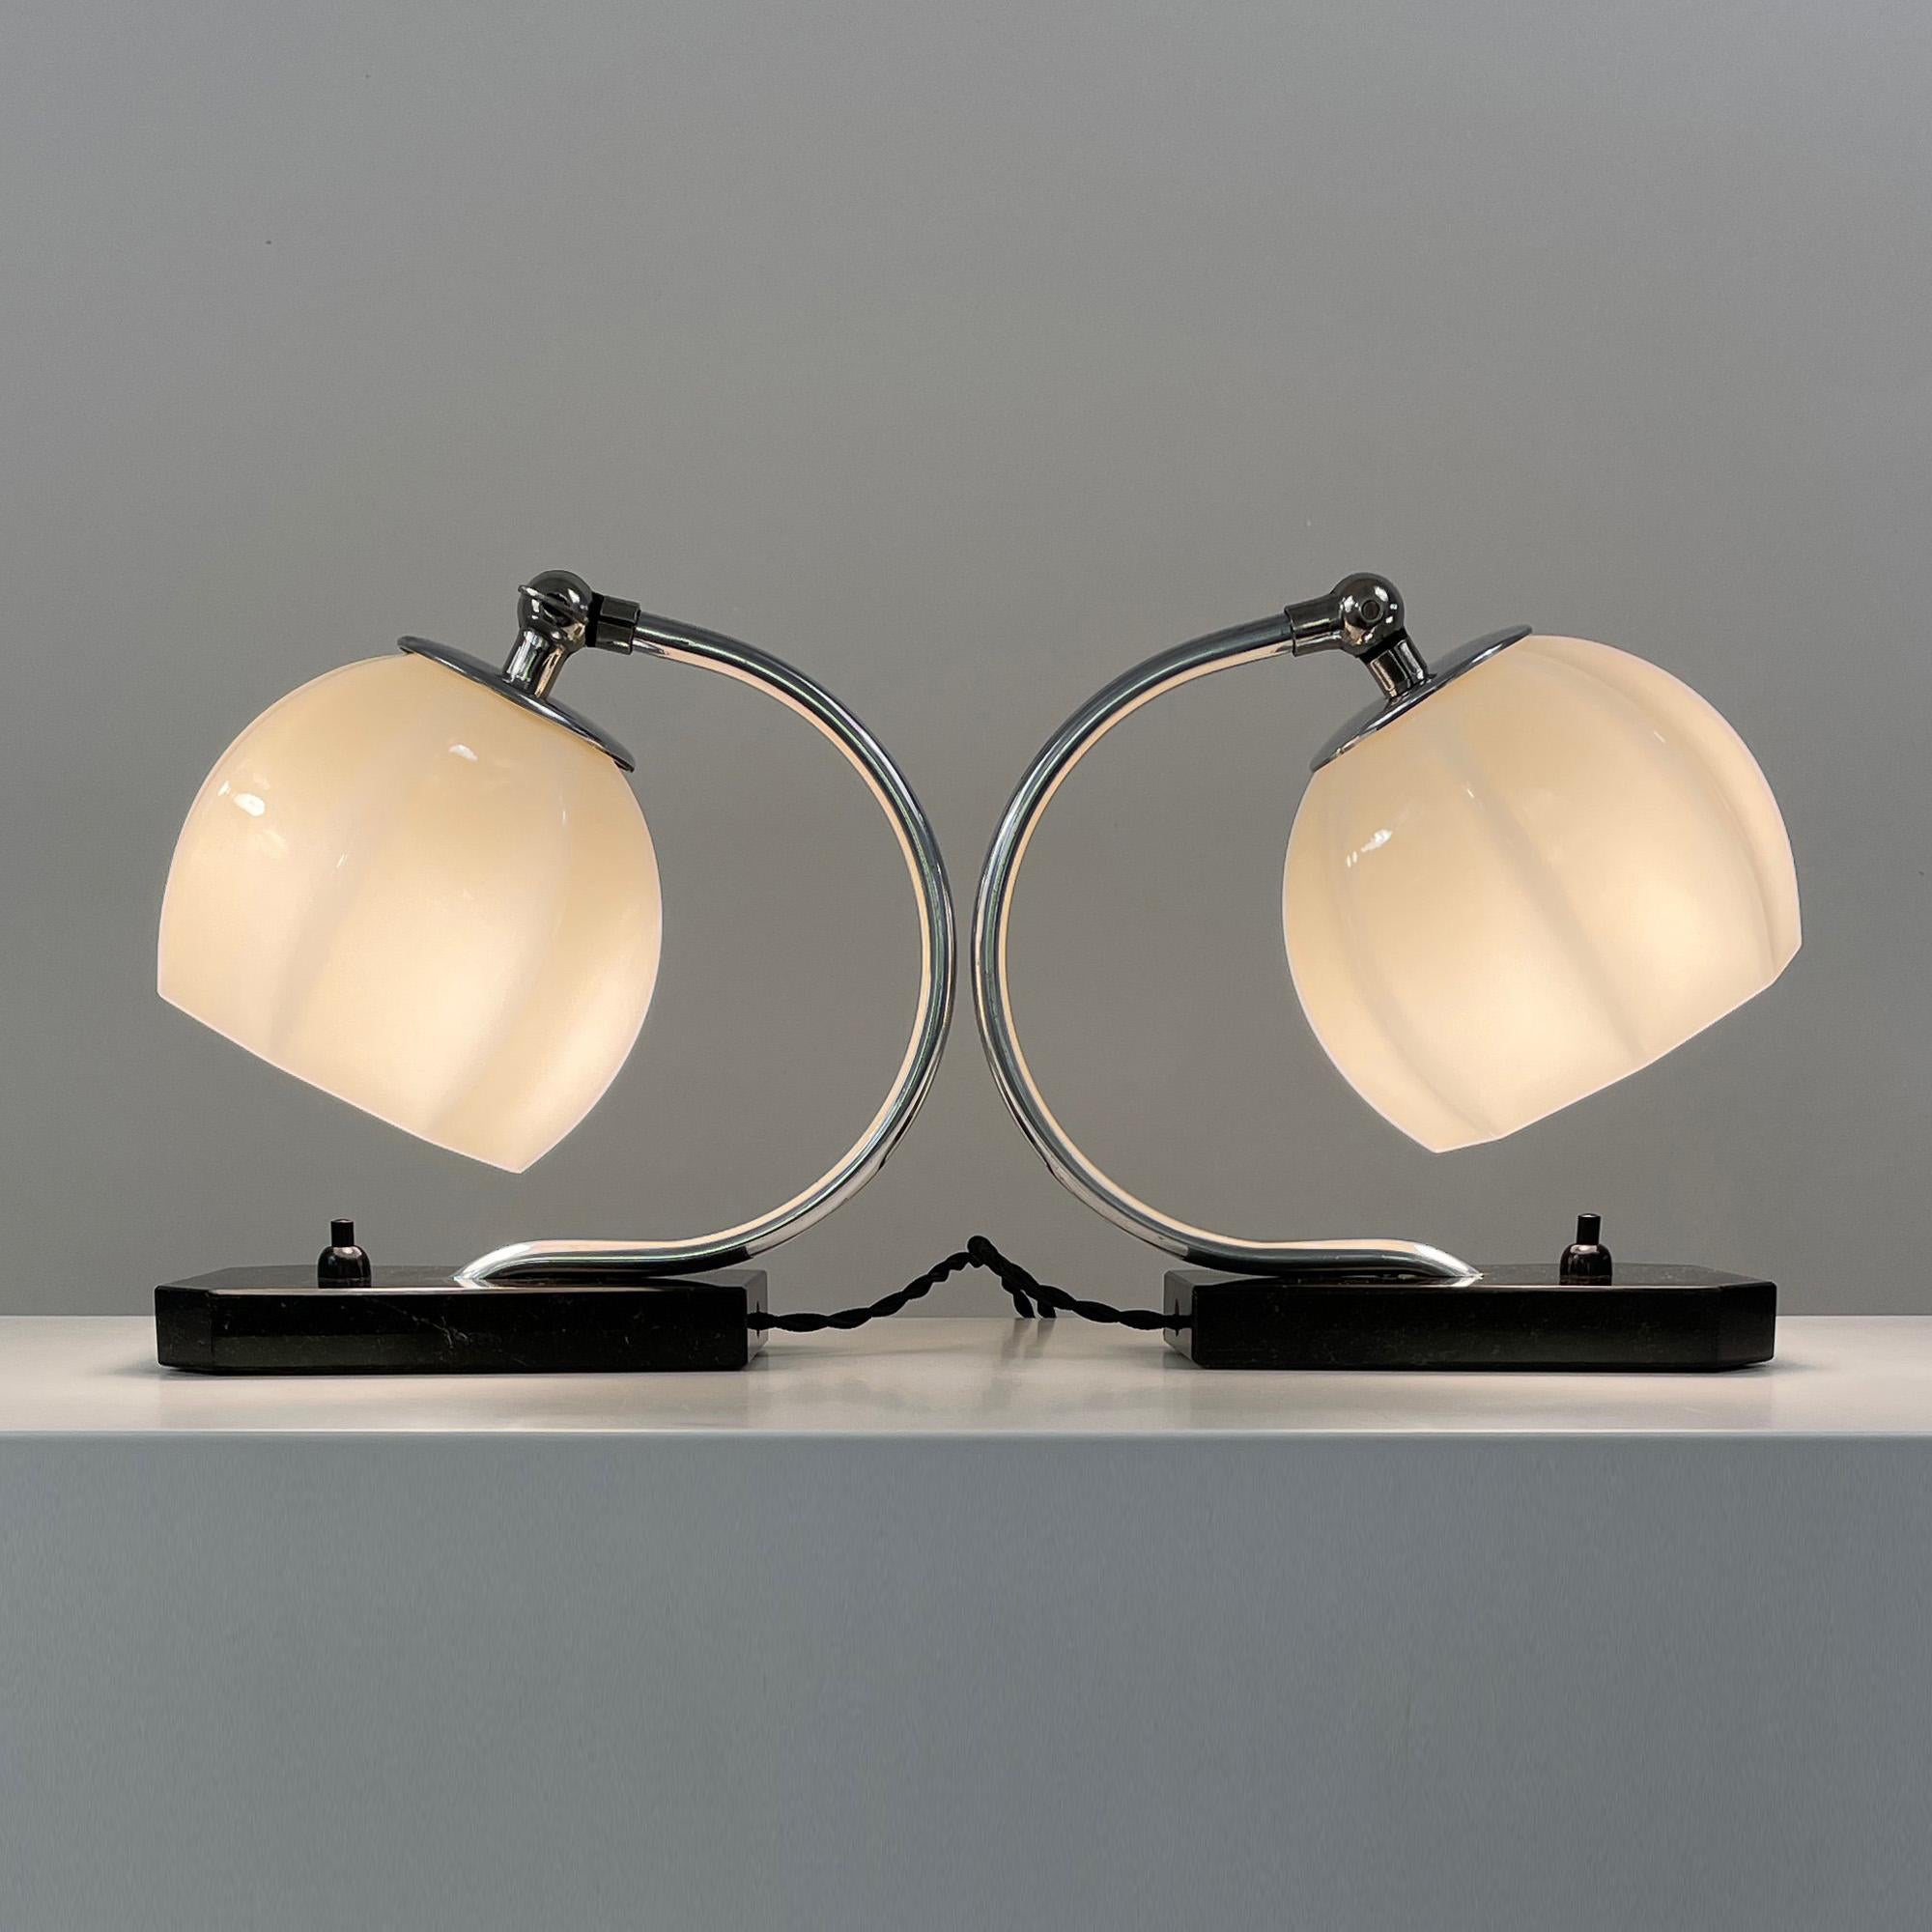 German Art Deco Opaline Glass, Marble and Aluminum Table Lamps, 1930s For Sale 7